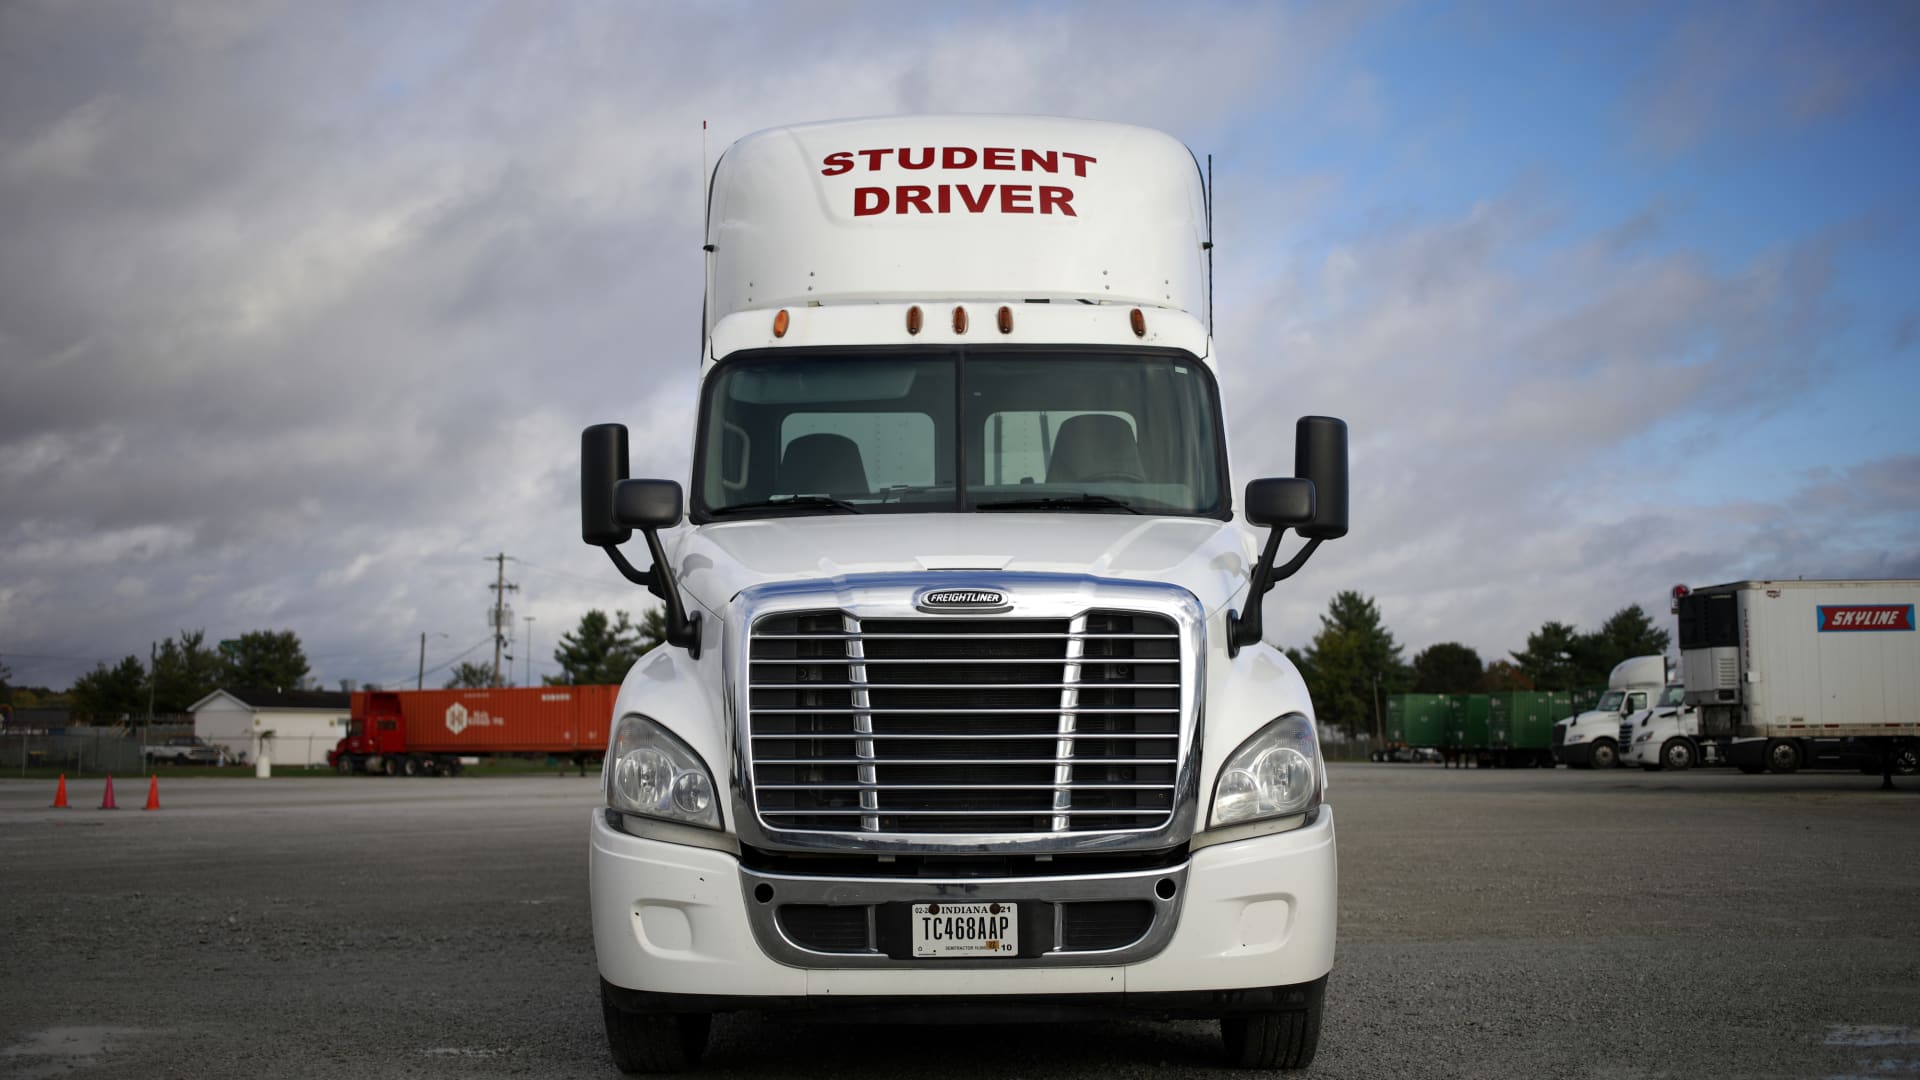 A semi truck used by students while earning their commercial driver's license (CDL) parked at Truck America Training of Kentucky in Shepherdsville, Kentucky, U.S., on Monday, Oct. 25, 2021.